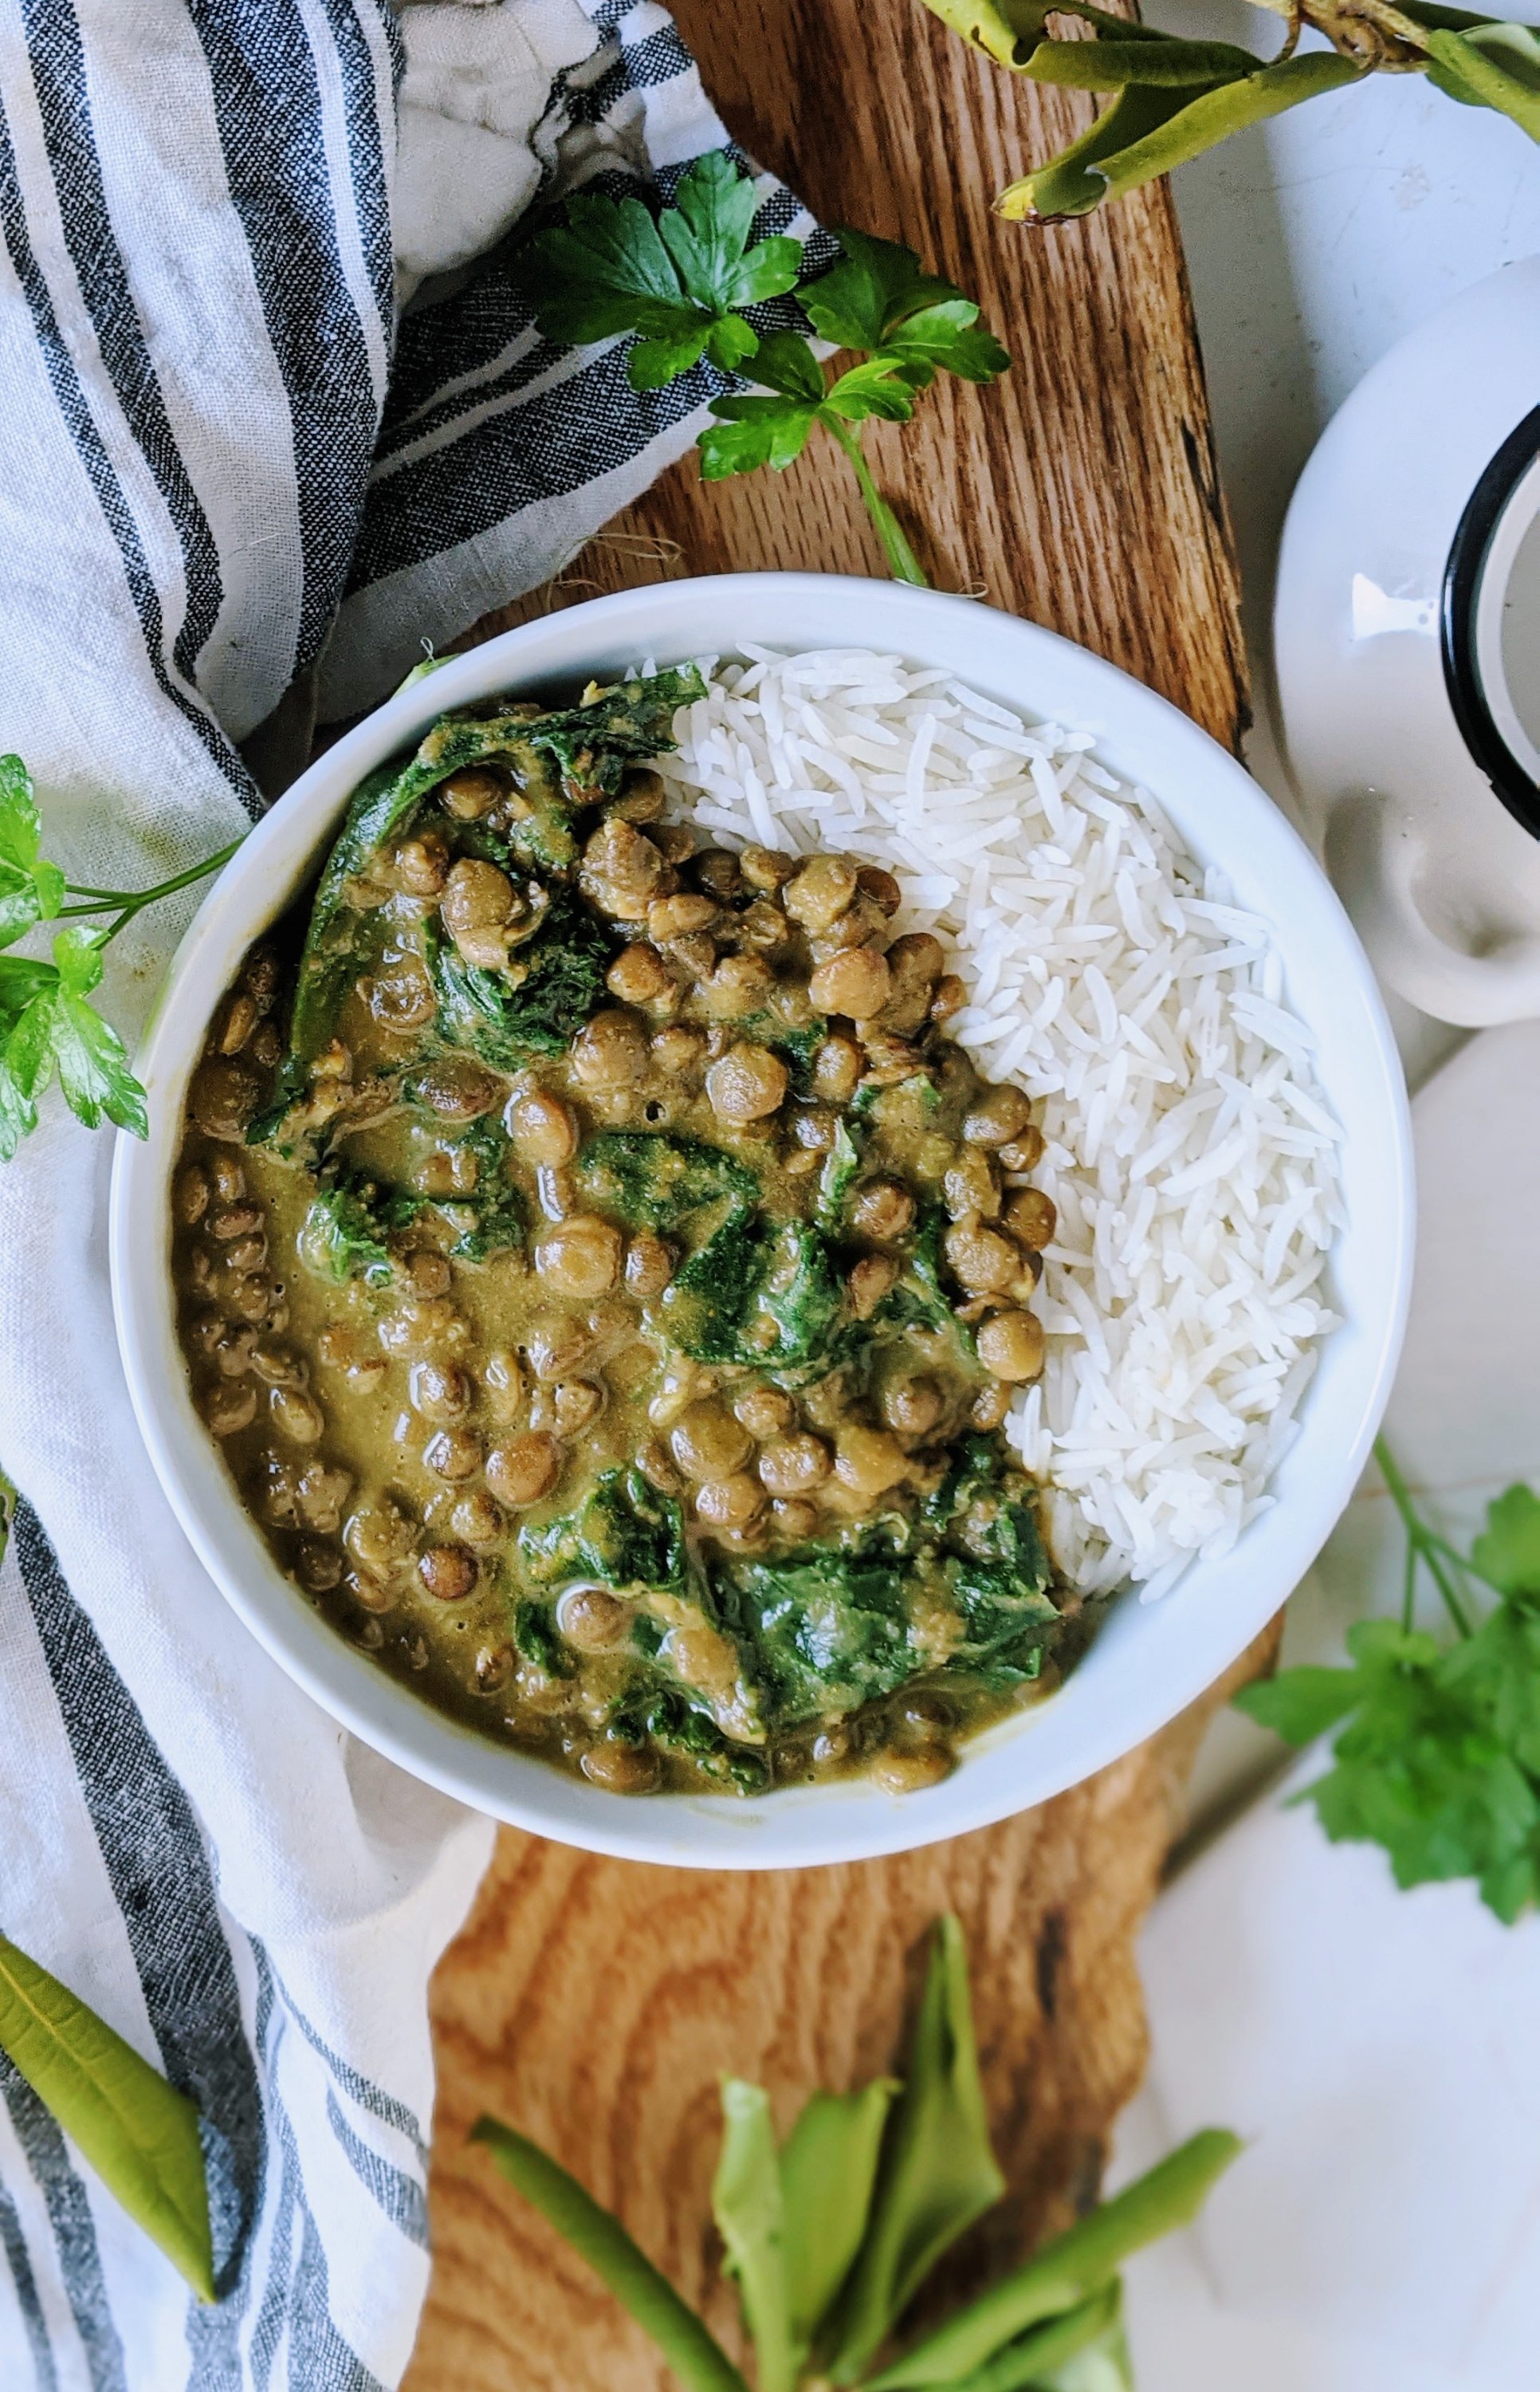 easy spicy lentil curry vegan gluten free vegetarian meatless meal prep ideas over rice basmati curry with lentils and coconut milk kale or collard greens